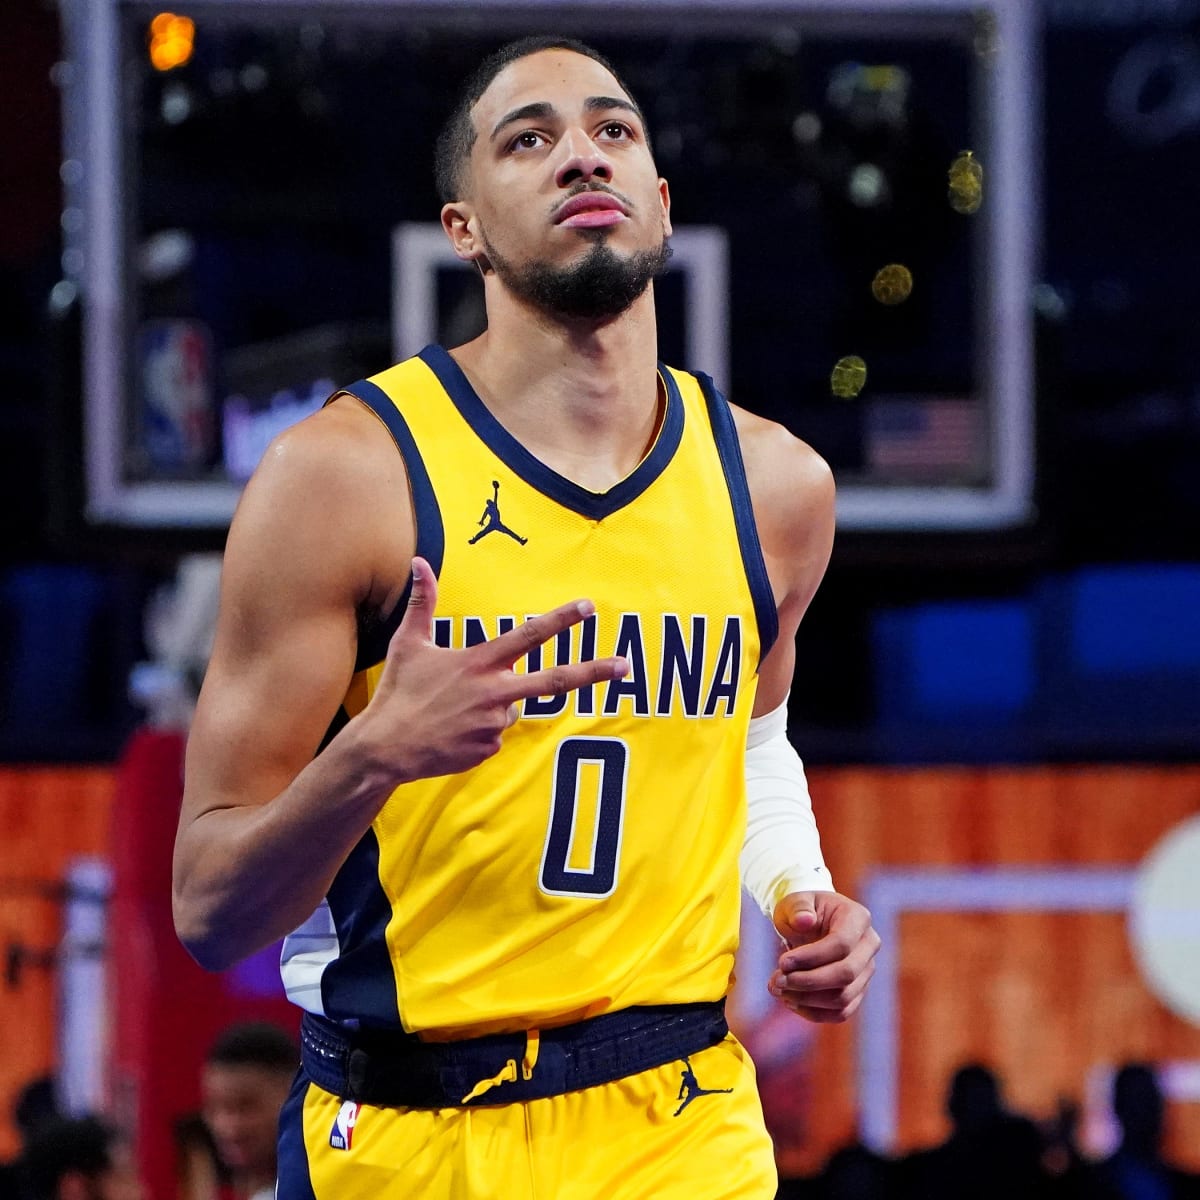 The Indiana Pacers are having a moment they were built for